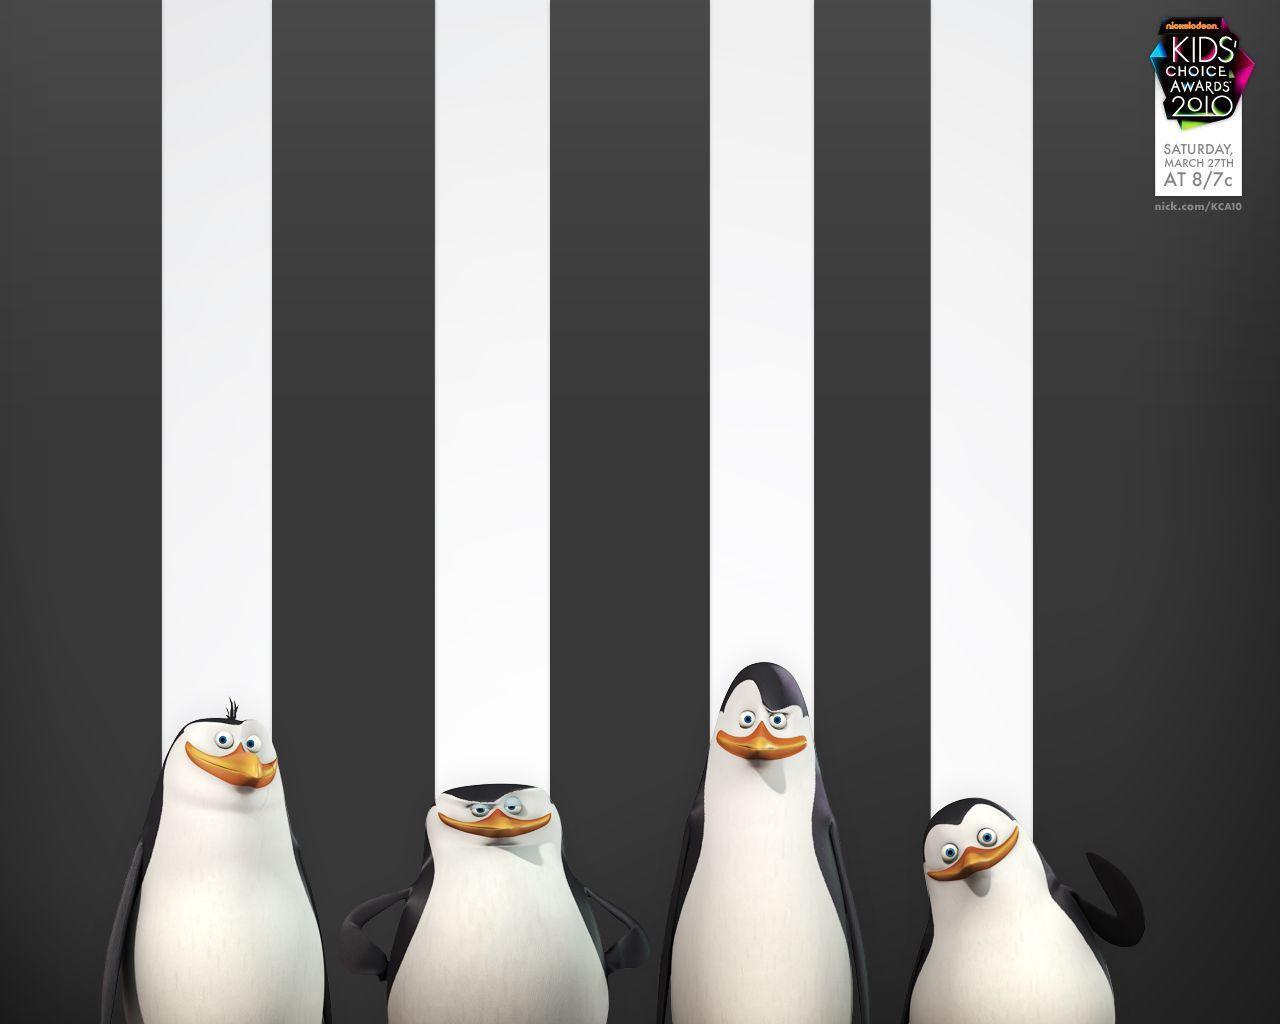 P, L and E! image The penguins of madagascar HD wallpaper